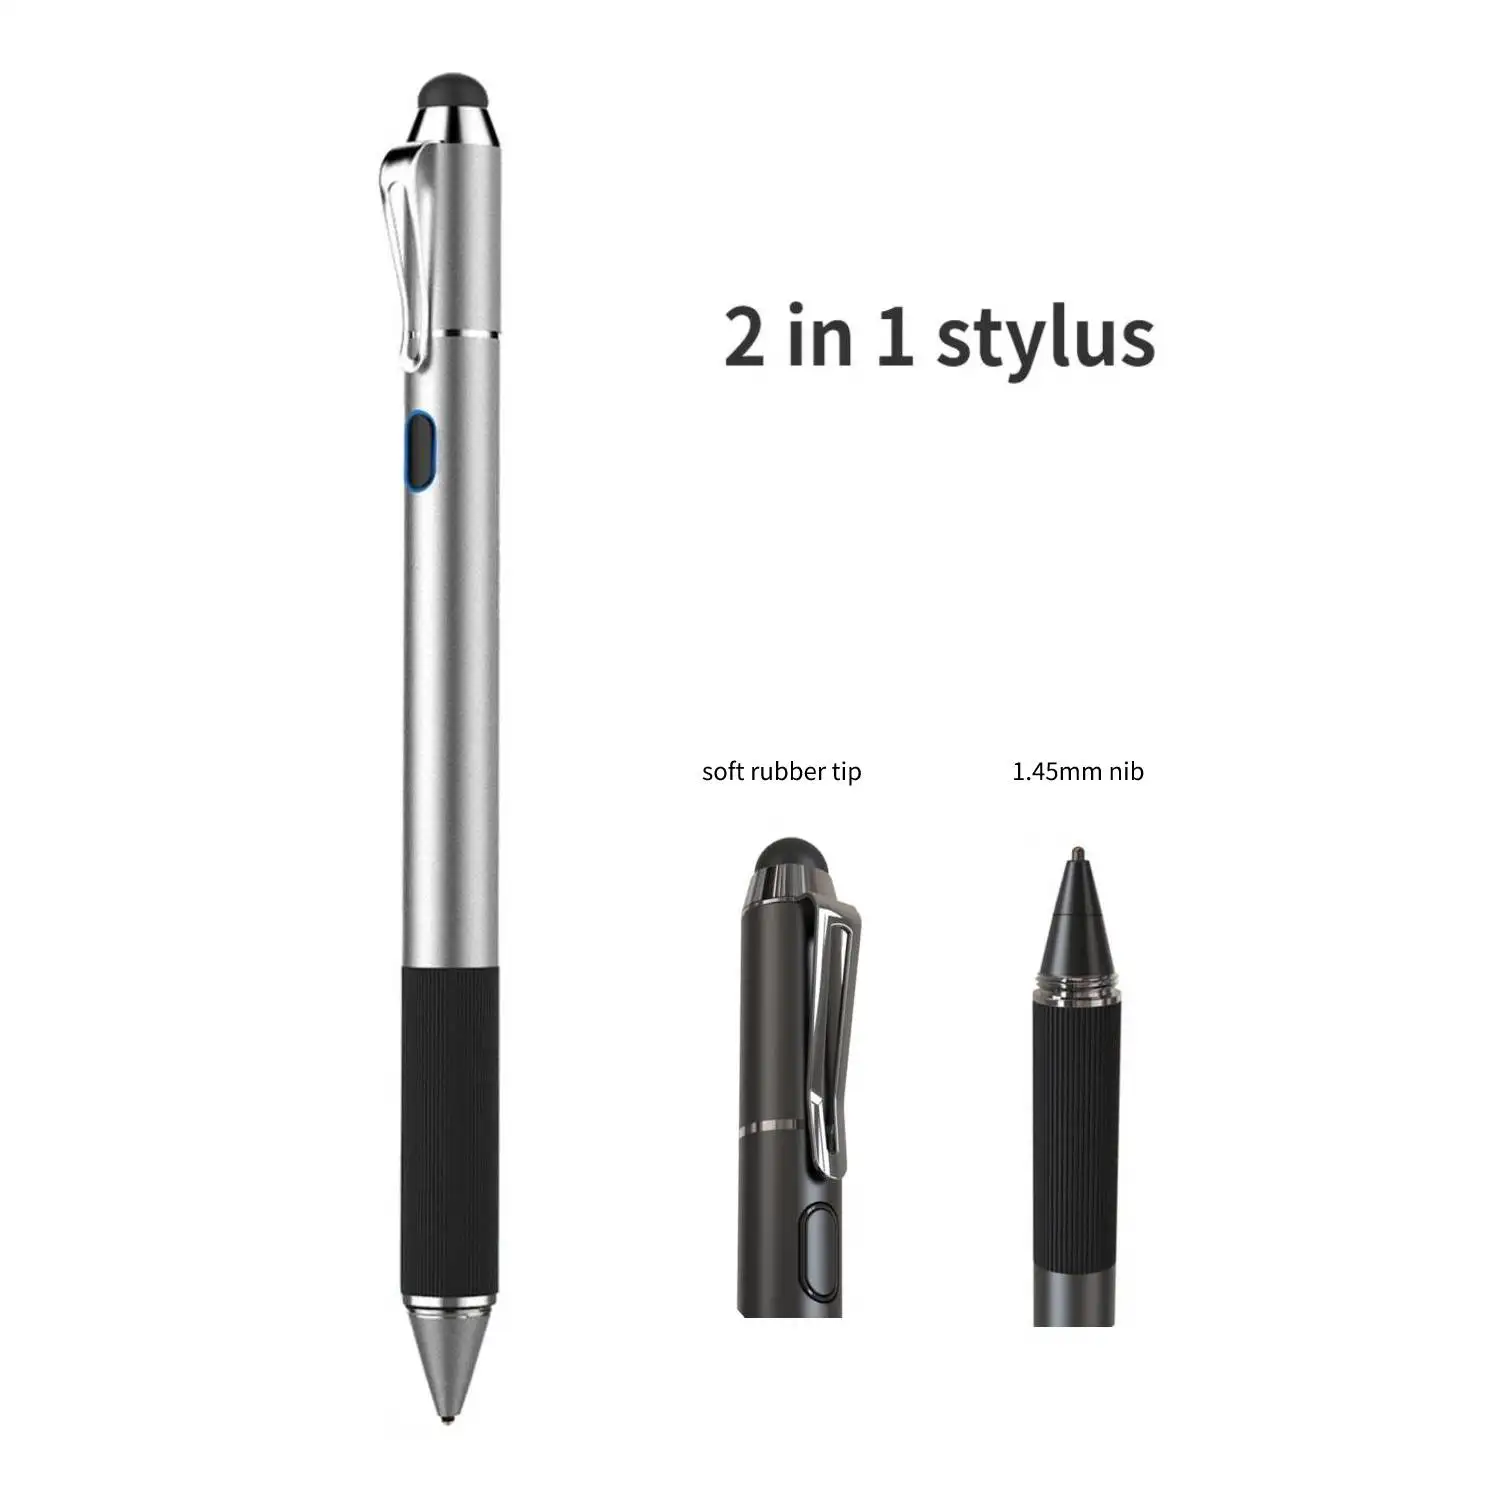 Low Moq 2 In 1 Stylus 1.5mm Nib Pen For Touch Screen Tablet Pc Universal Touch Switch Soft Rubber Tip For Android Apple I Phone